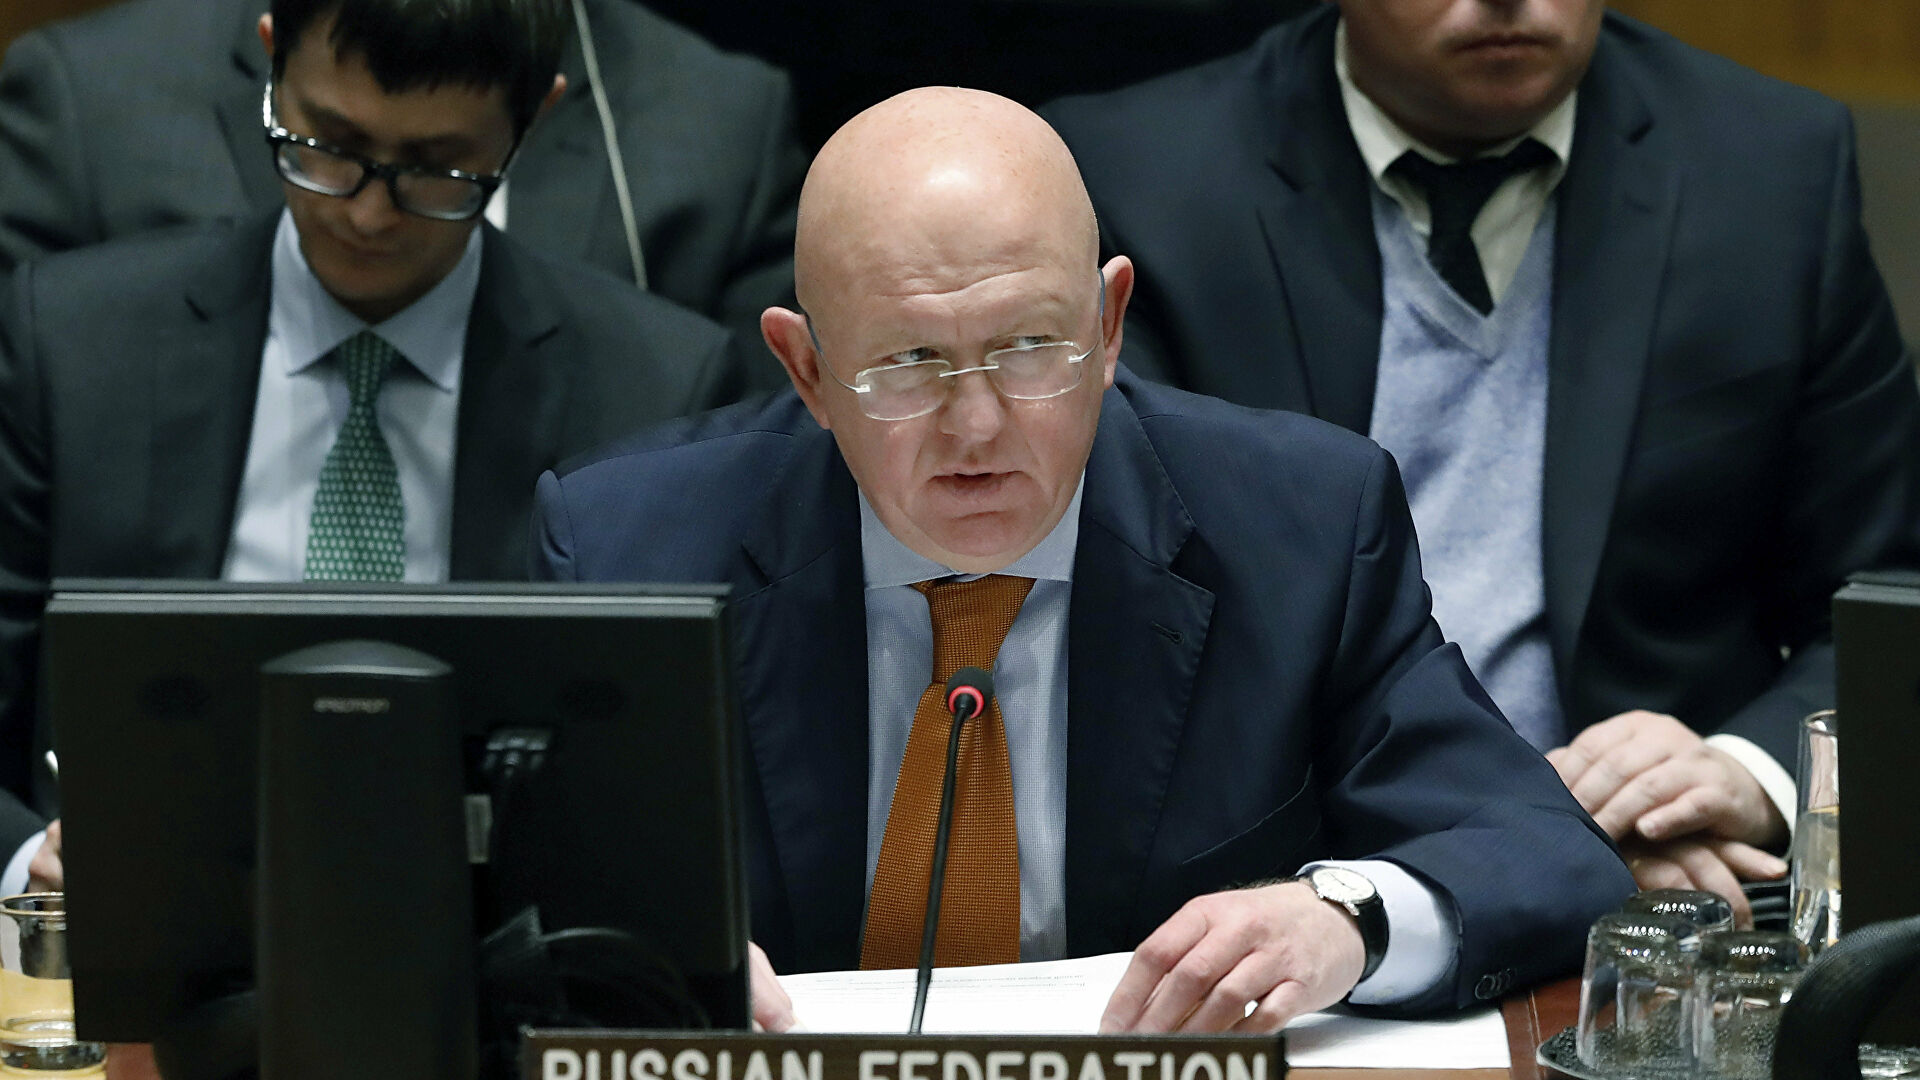 British Presidency “Censored” Russia on Bucha Issue: Refused UN Security Council Meeting